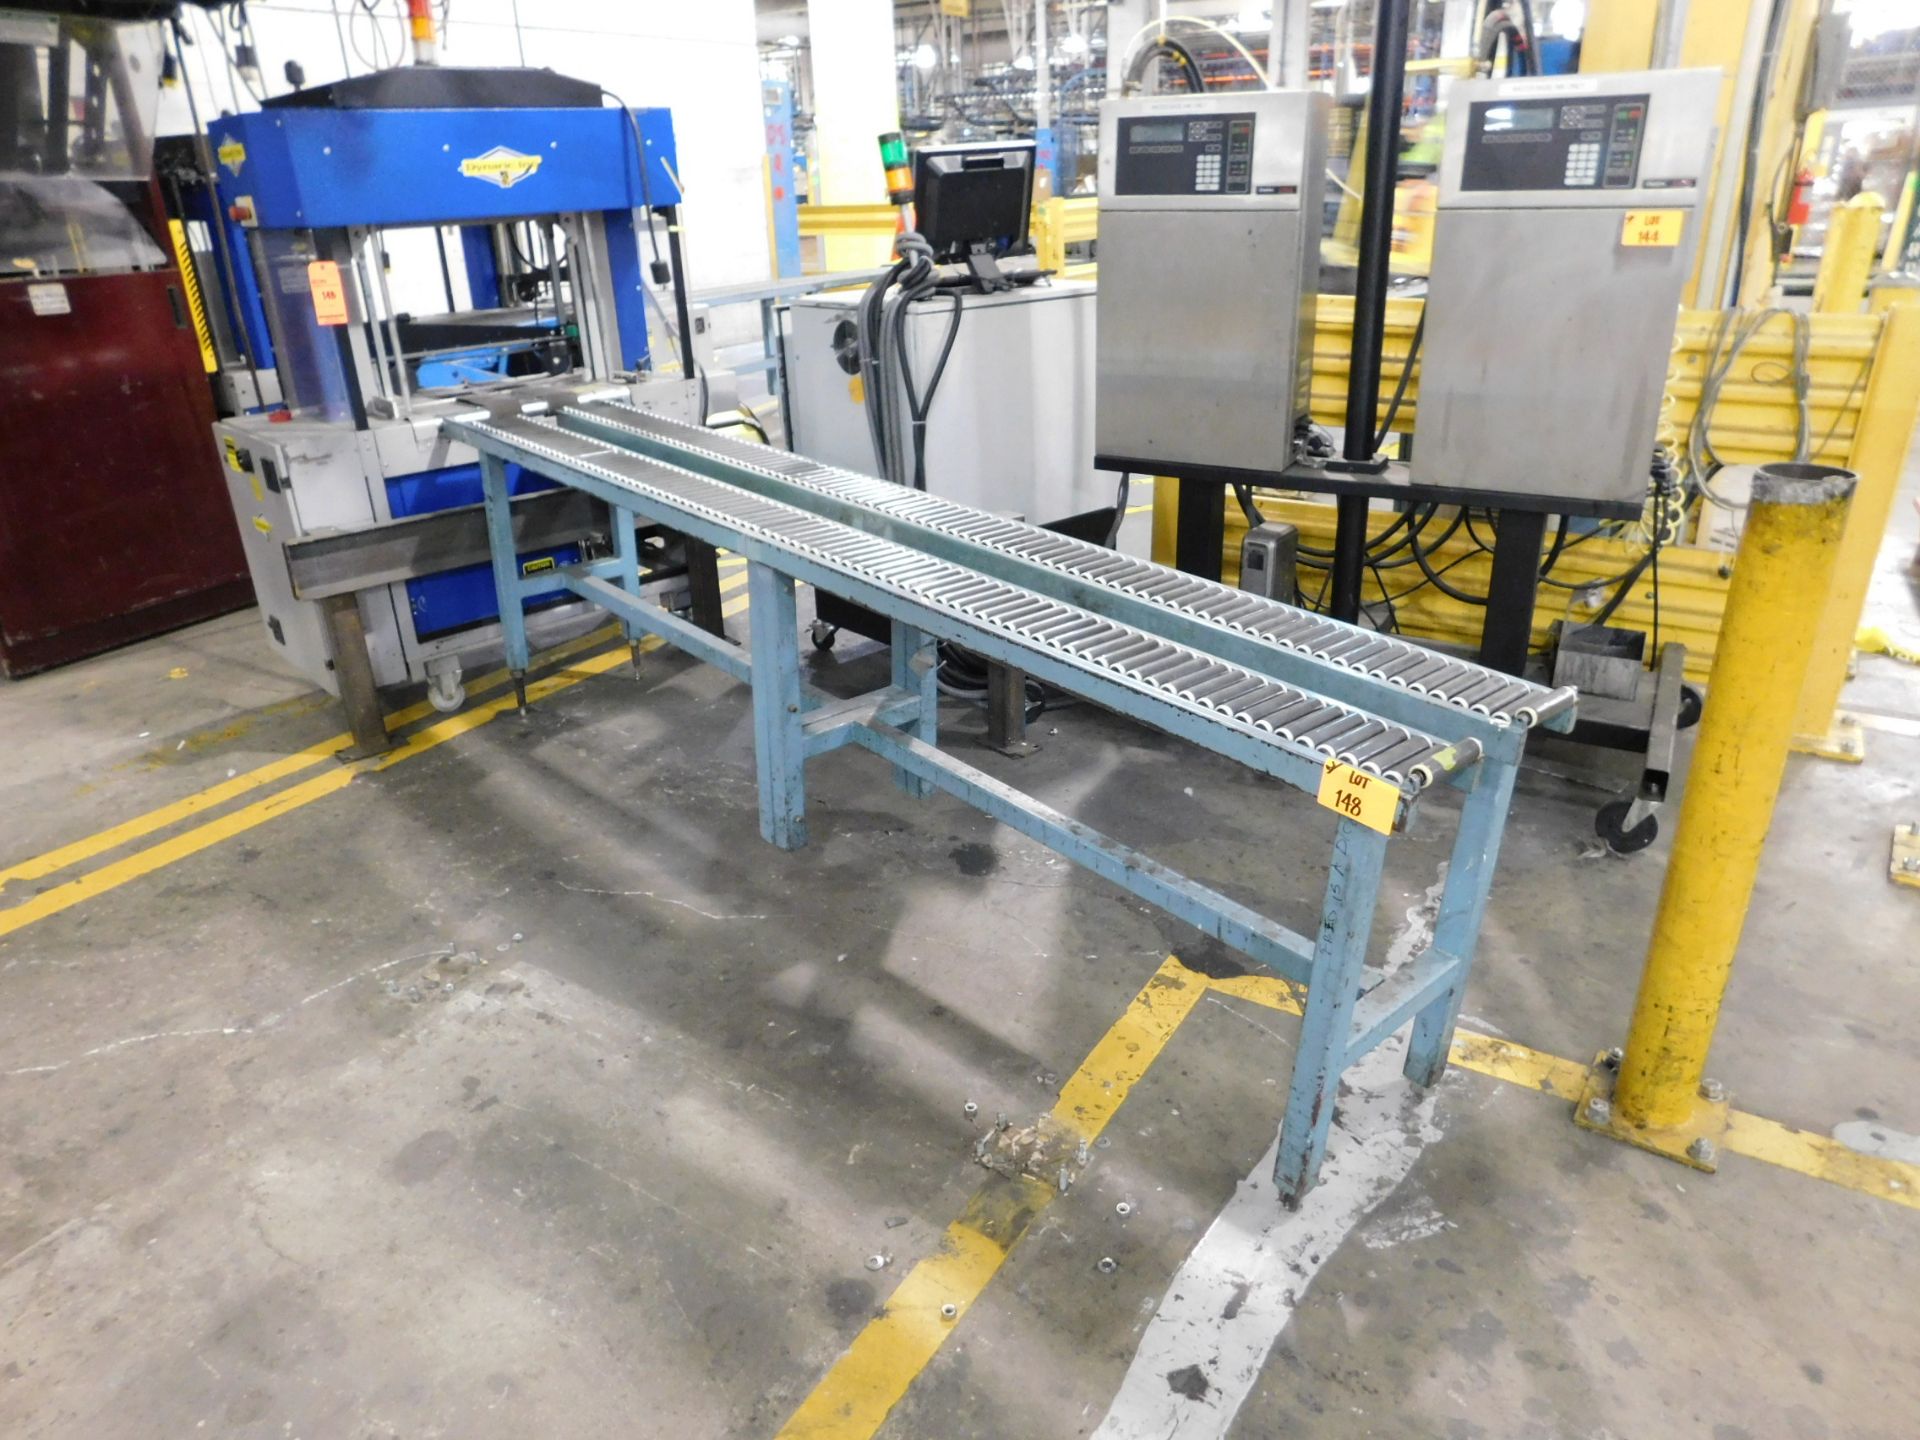 Dynark banding machine with discharge roller conveyor, 10 ft. long by 18 in. wide, asset # PT8009 - Image 2 of 2